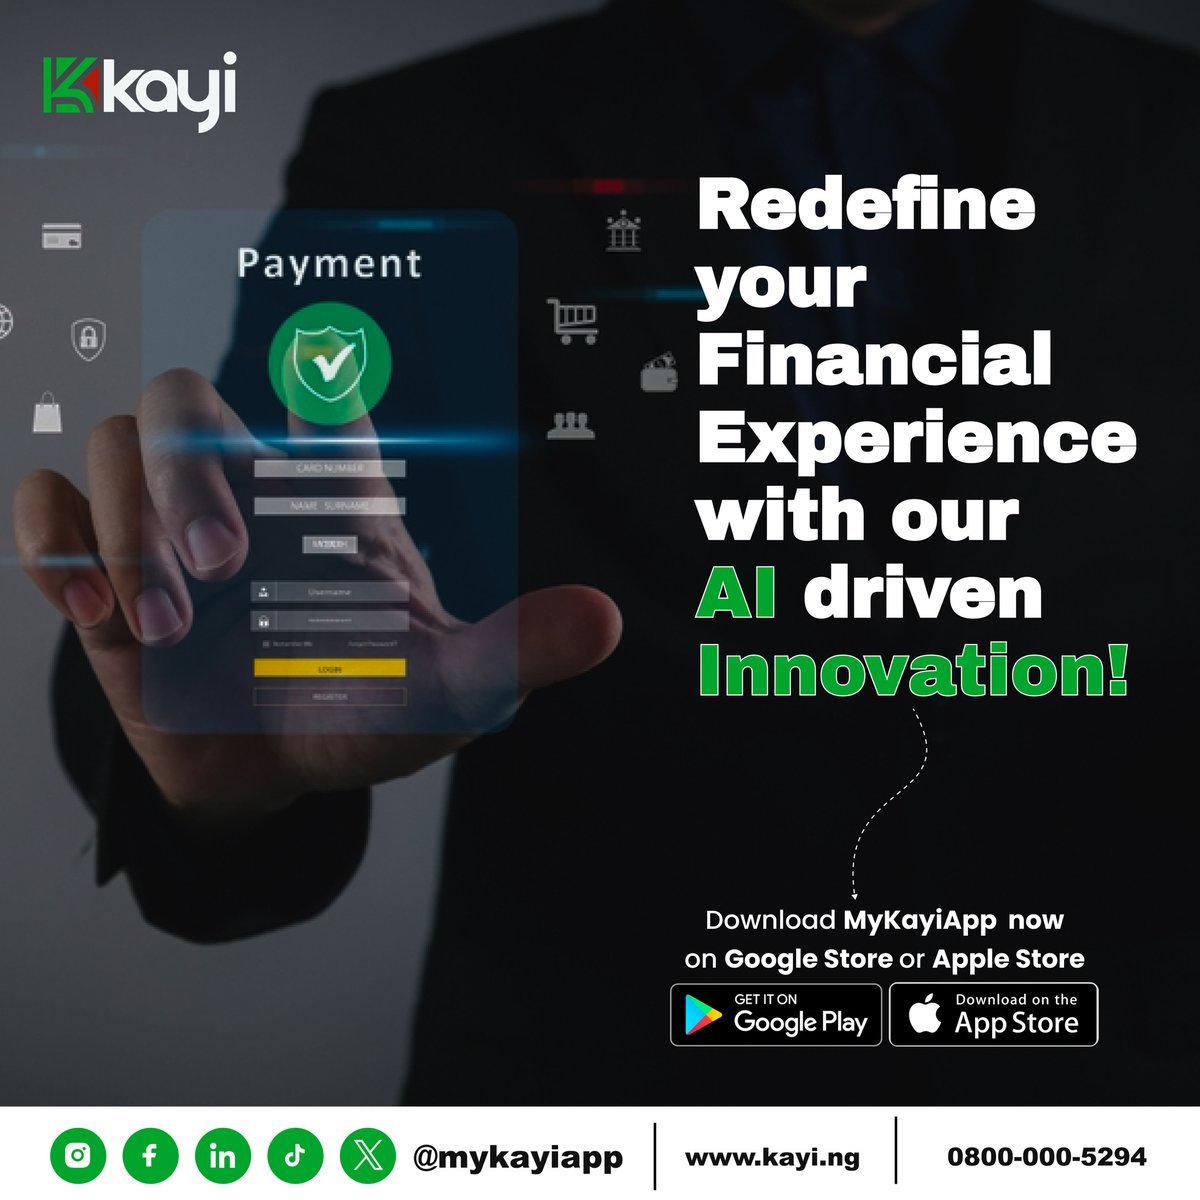 Discover the joy of digital banking! Explore seamless banking experiences powered by AI-driven innovation. Get started today by downloading MyKayiApp from the Google Store or Apple Store.

#MyKayiApp #NowLive #Kayiway #DownloadNow #Bankingwithoutlimits #downloadmykayiapp